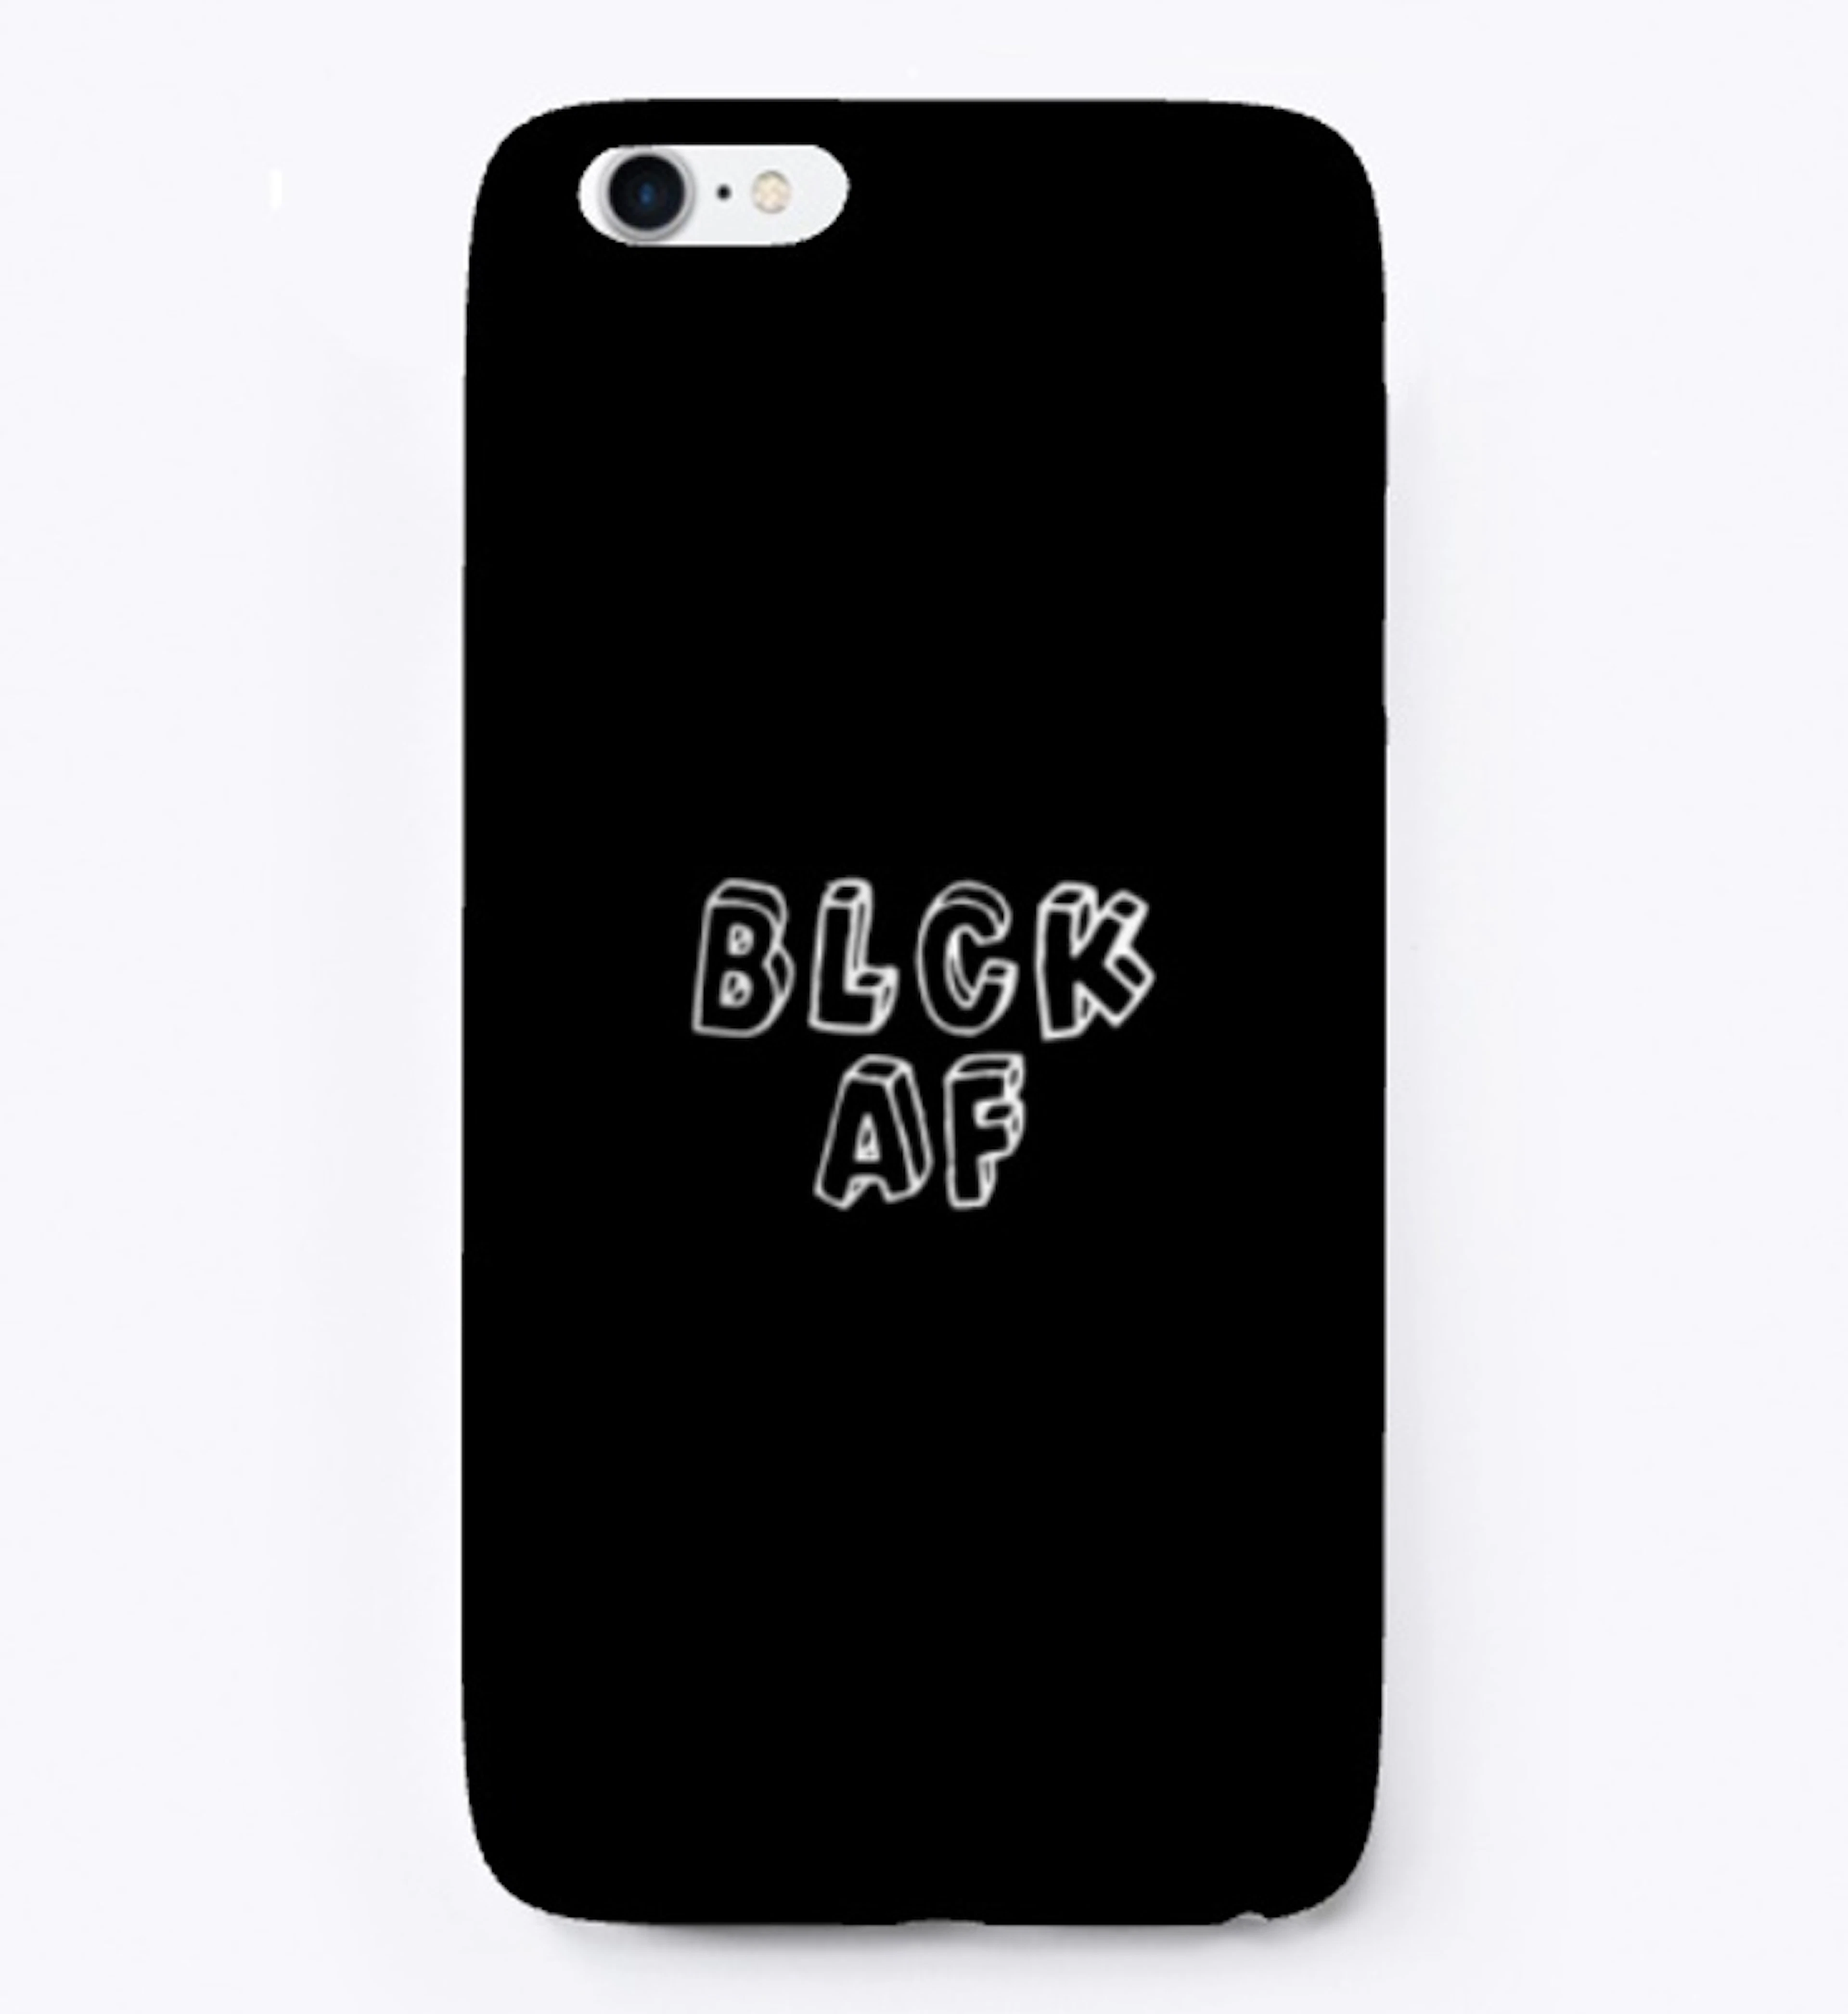 All 'BLCK' Everything